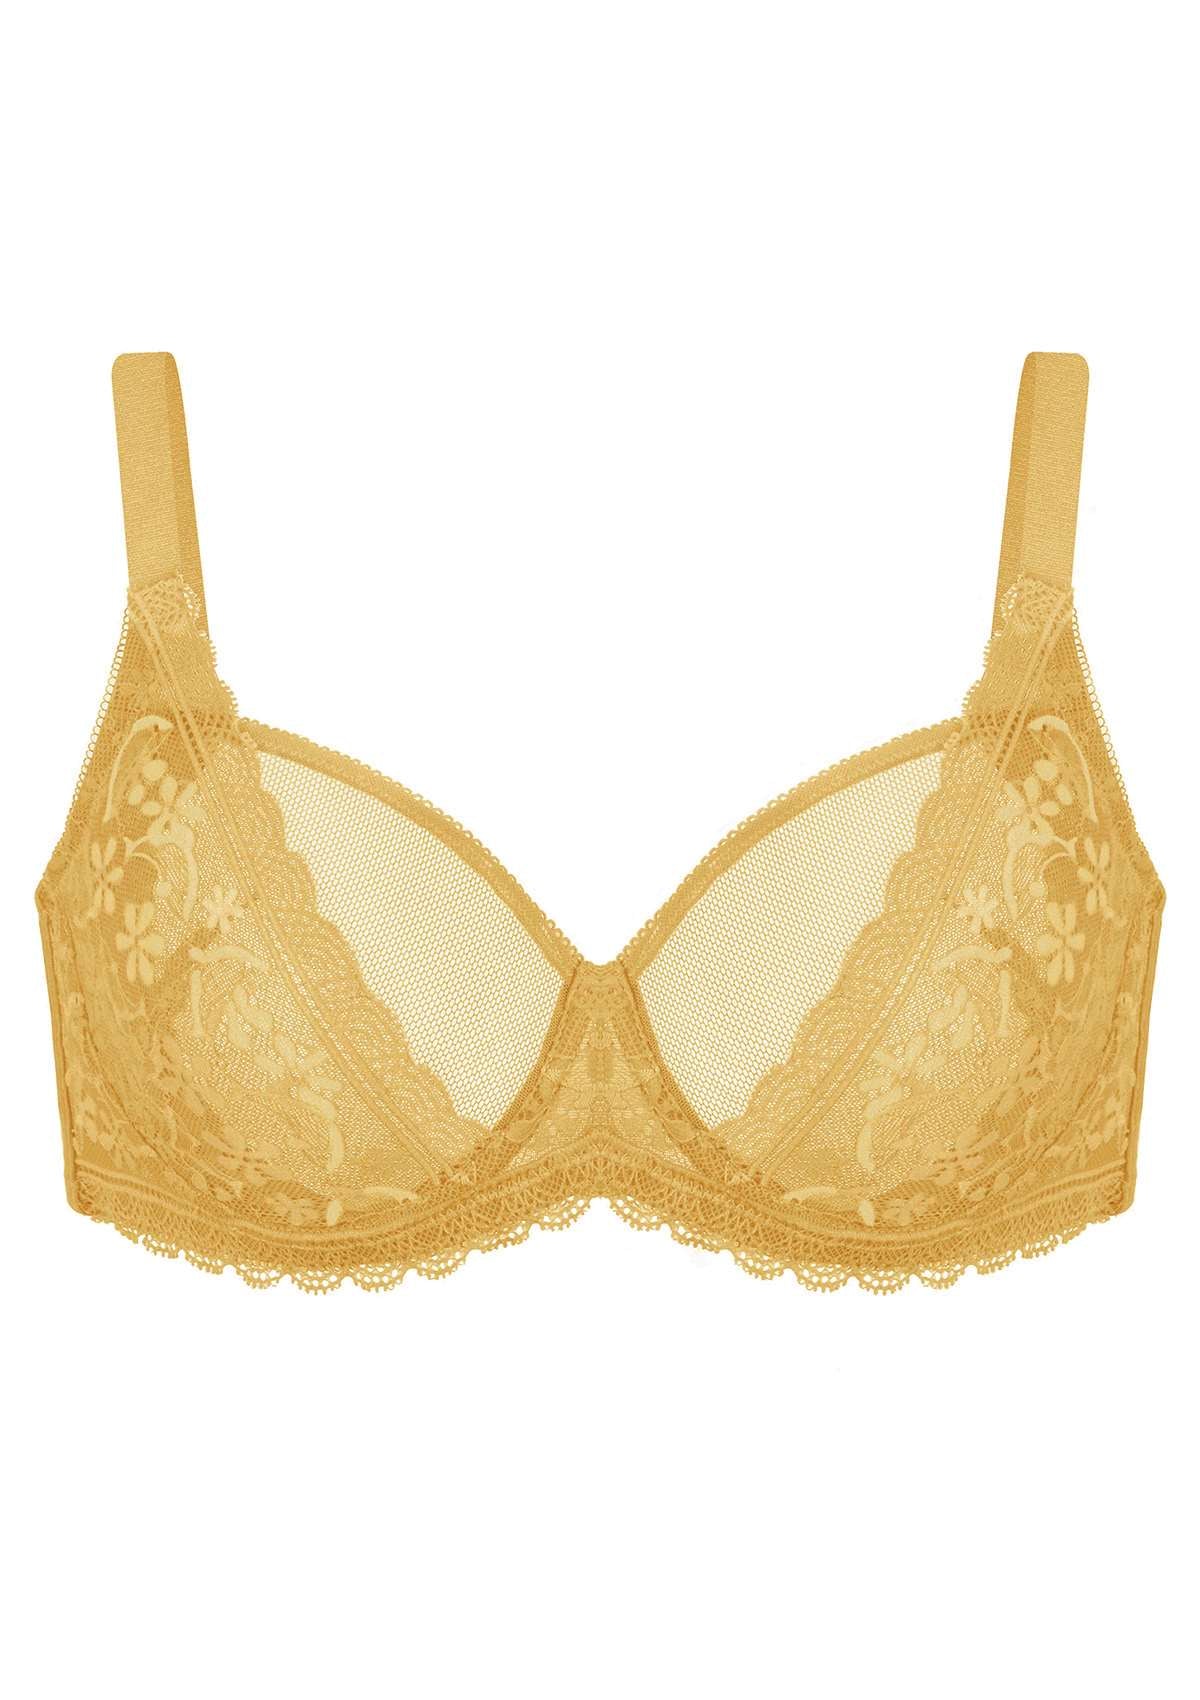 HSIA Anemone Lace Unlined Bra: Supportive, Lightweight Bra - Ginger / 40 / C